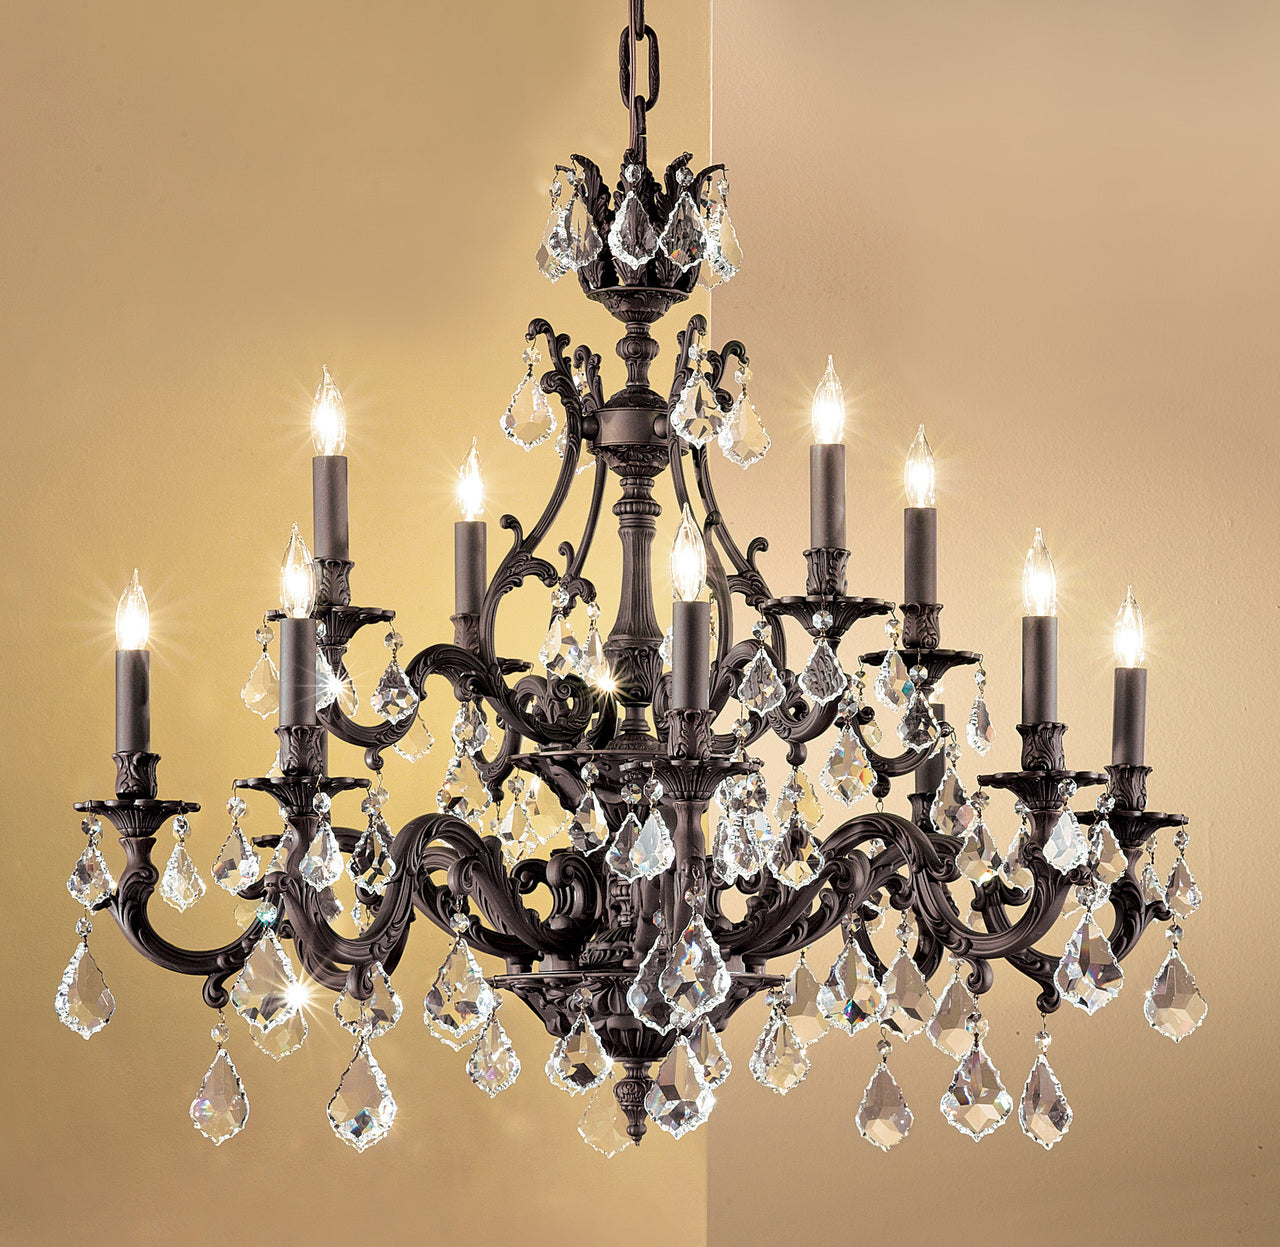 Classic Lighting 57349 FG CBK Majestic Crystal Chandelier in French Gold (Imported from Spain)